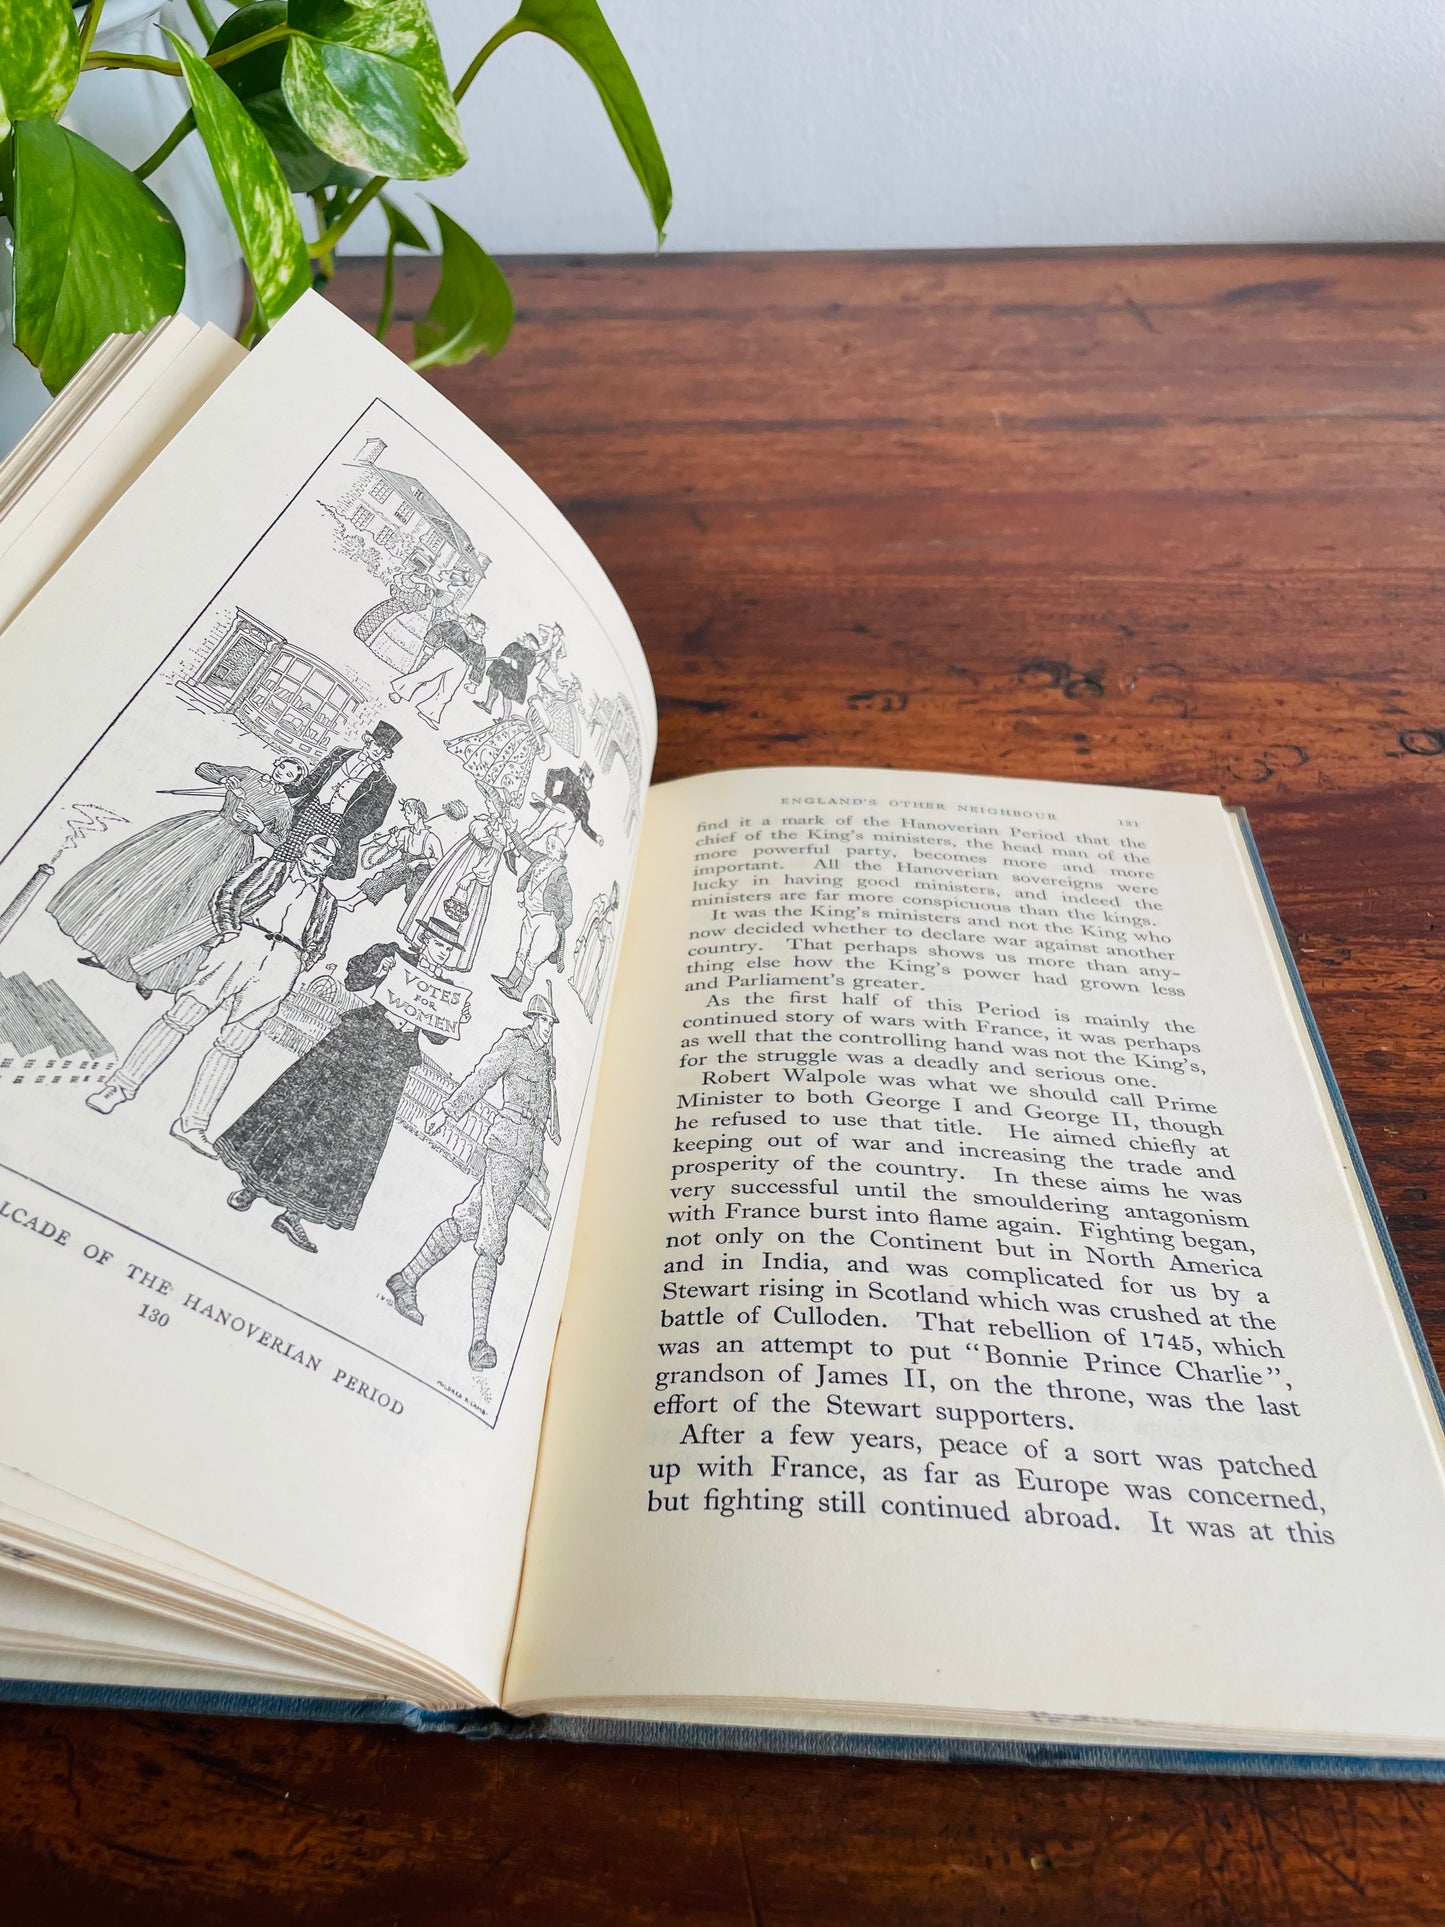 From Serf to Citizen Book One Clothbound Hardcover by W. C. J. Ward - Illustrated (1952)